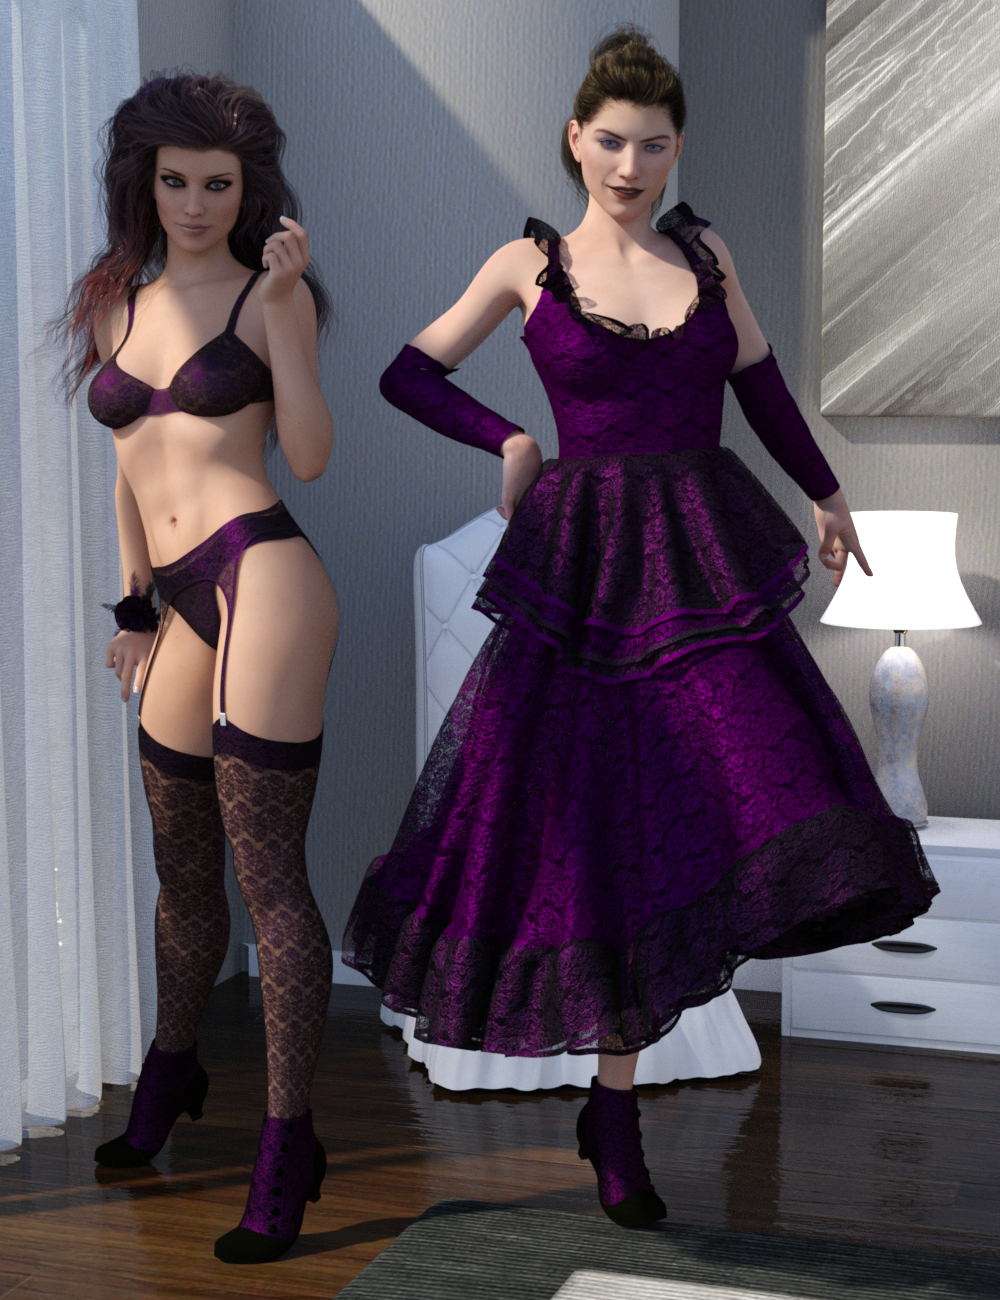 Gothique for Frolic and Frolic Additions by: IDG DesignsDestinysGarden, 3D Models by Daz 3D